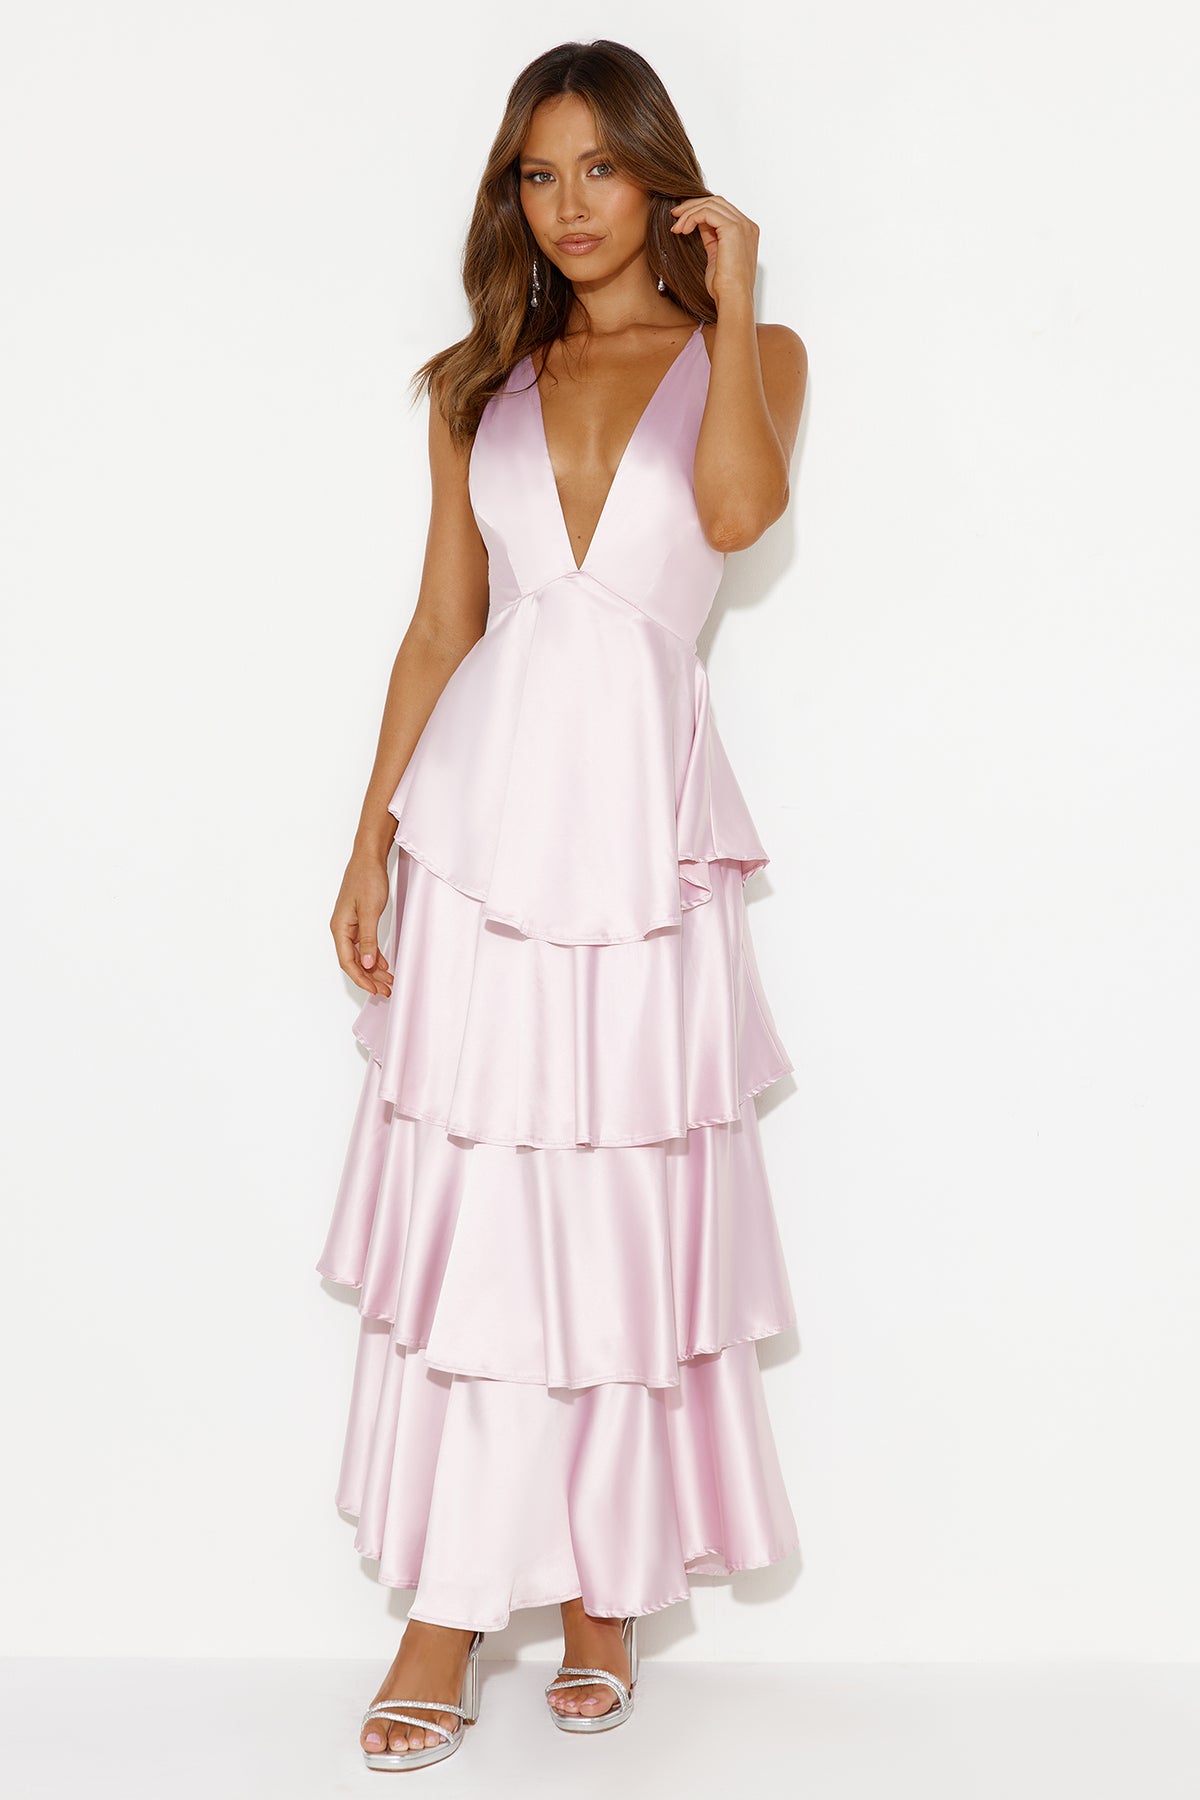 Shop Formal Dress - Party Of The Year Satin Maxi Dress Light Pink third image